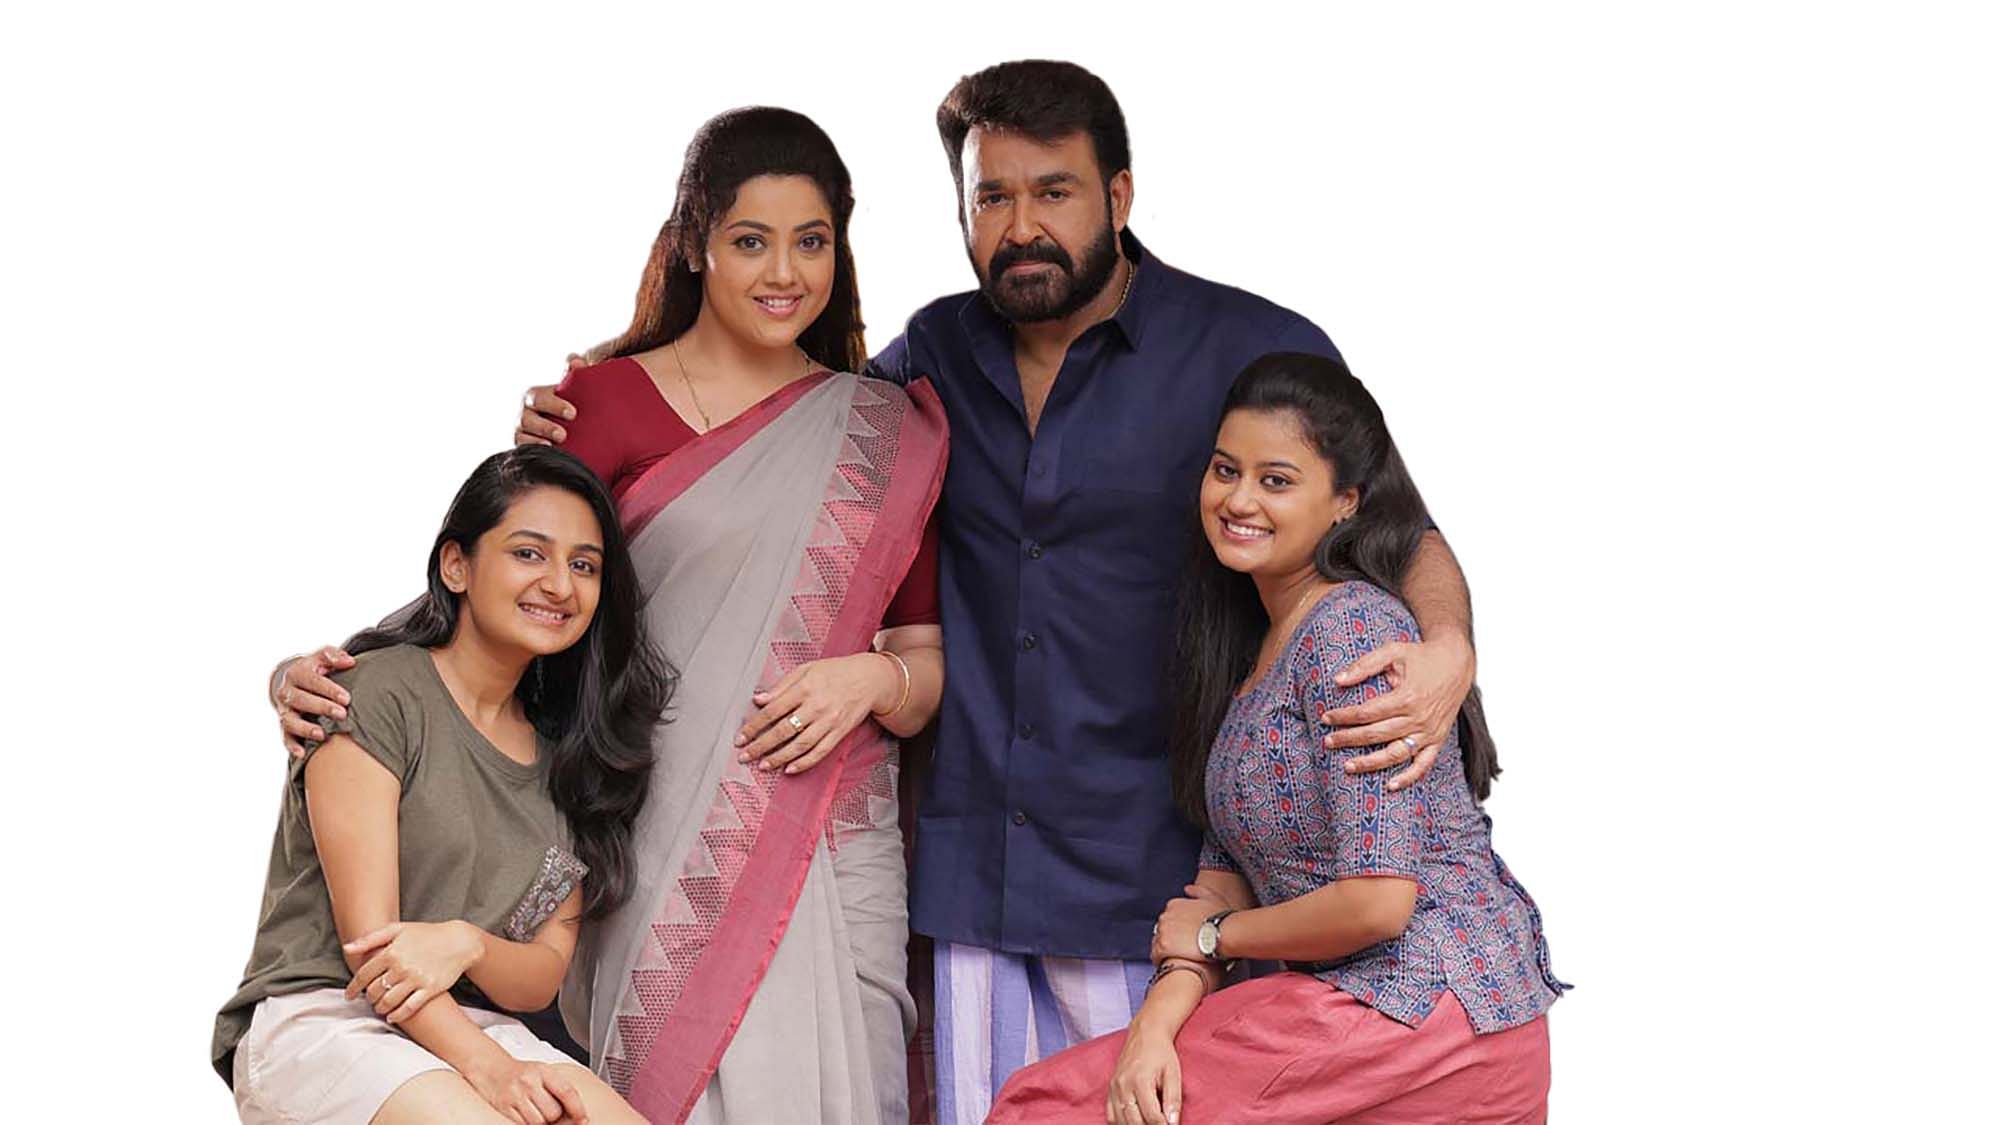 'Drishyam 2' once again showcases the wonders of the criminal mind of Georgekutty, essayed by veteran Mohanlal. 